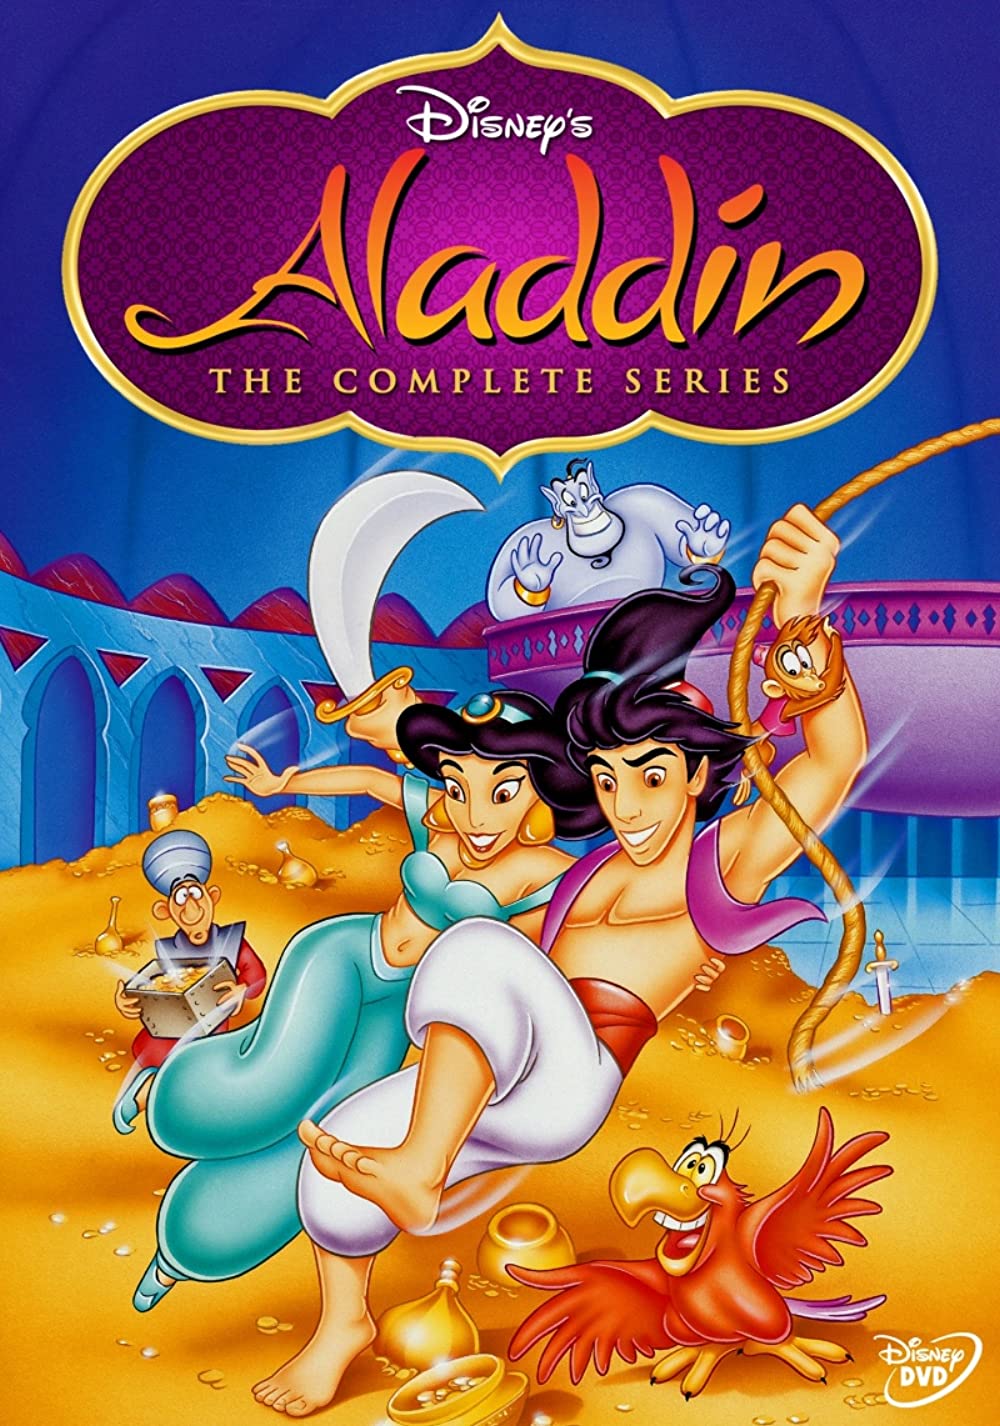 Aladdin-Best-Old-Hindi-Dubbed-Cartoons-That-We-All-Love - Pop Culture,  Entertainment, Humor, Travel & More